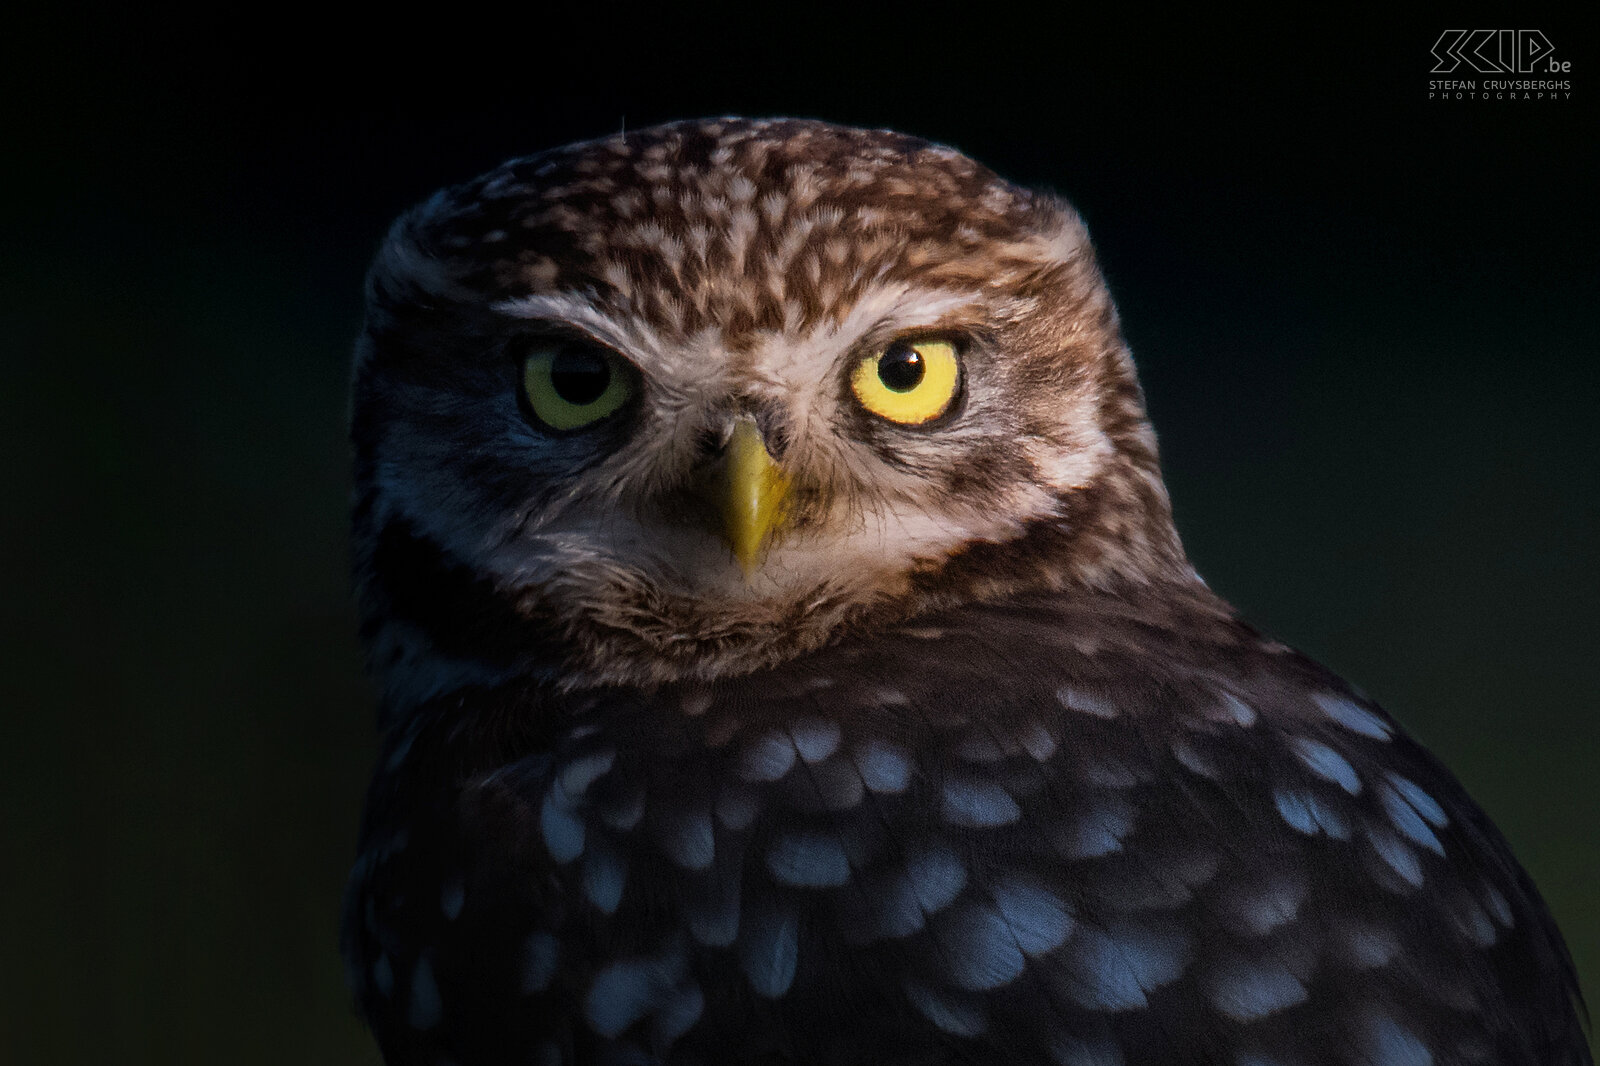 Closeup little owl The little owl is mainly nocturnal and can be found in a wide range of habitats including farmland, woodland, heathland, … It feeds on insects and small vertebrates like mices. Stefan Cruysberghs